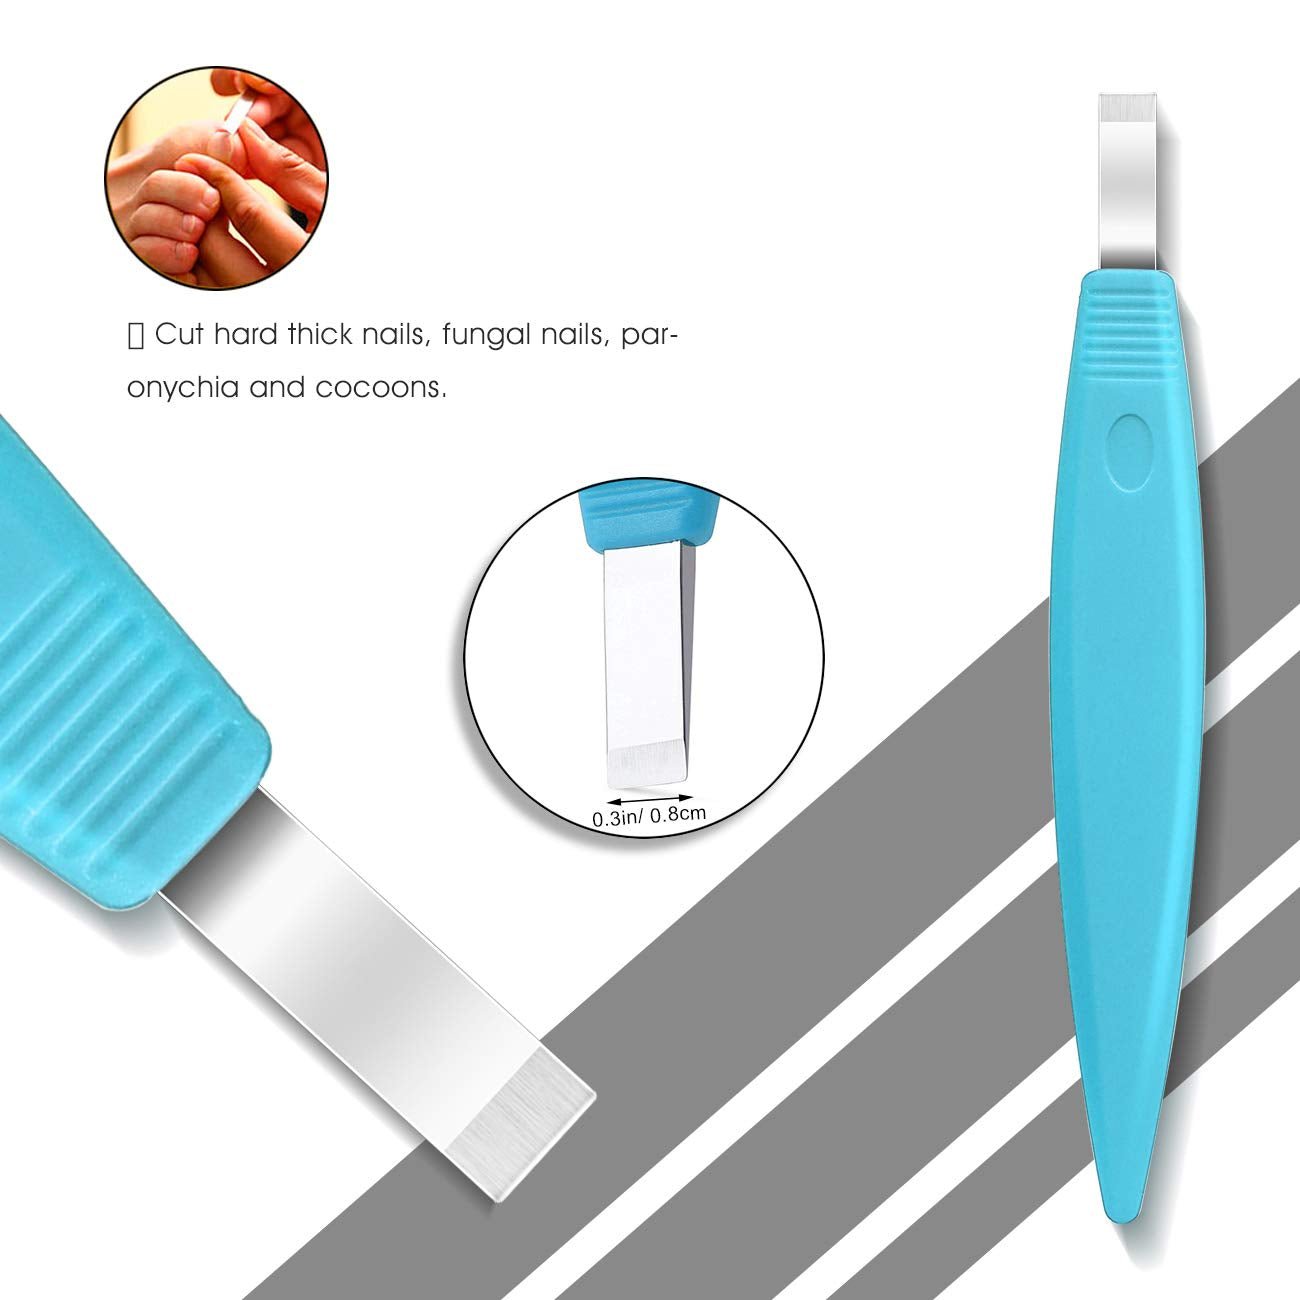 Pedicure Knife Set - Callus Shavers, Corn and Hard Thick Skin Remover Knives for Foot, Metal Nail File & Nail Lifter - Professional Pedicure Tools with Storage Box (Blue)